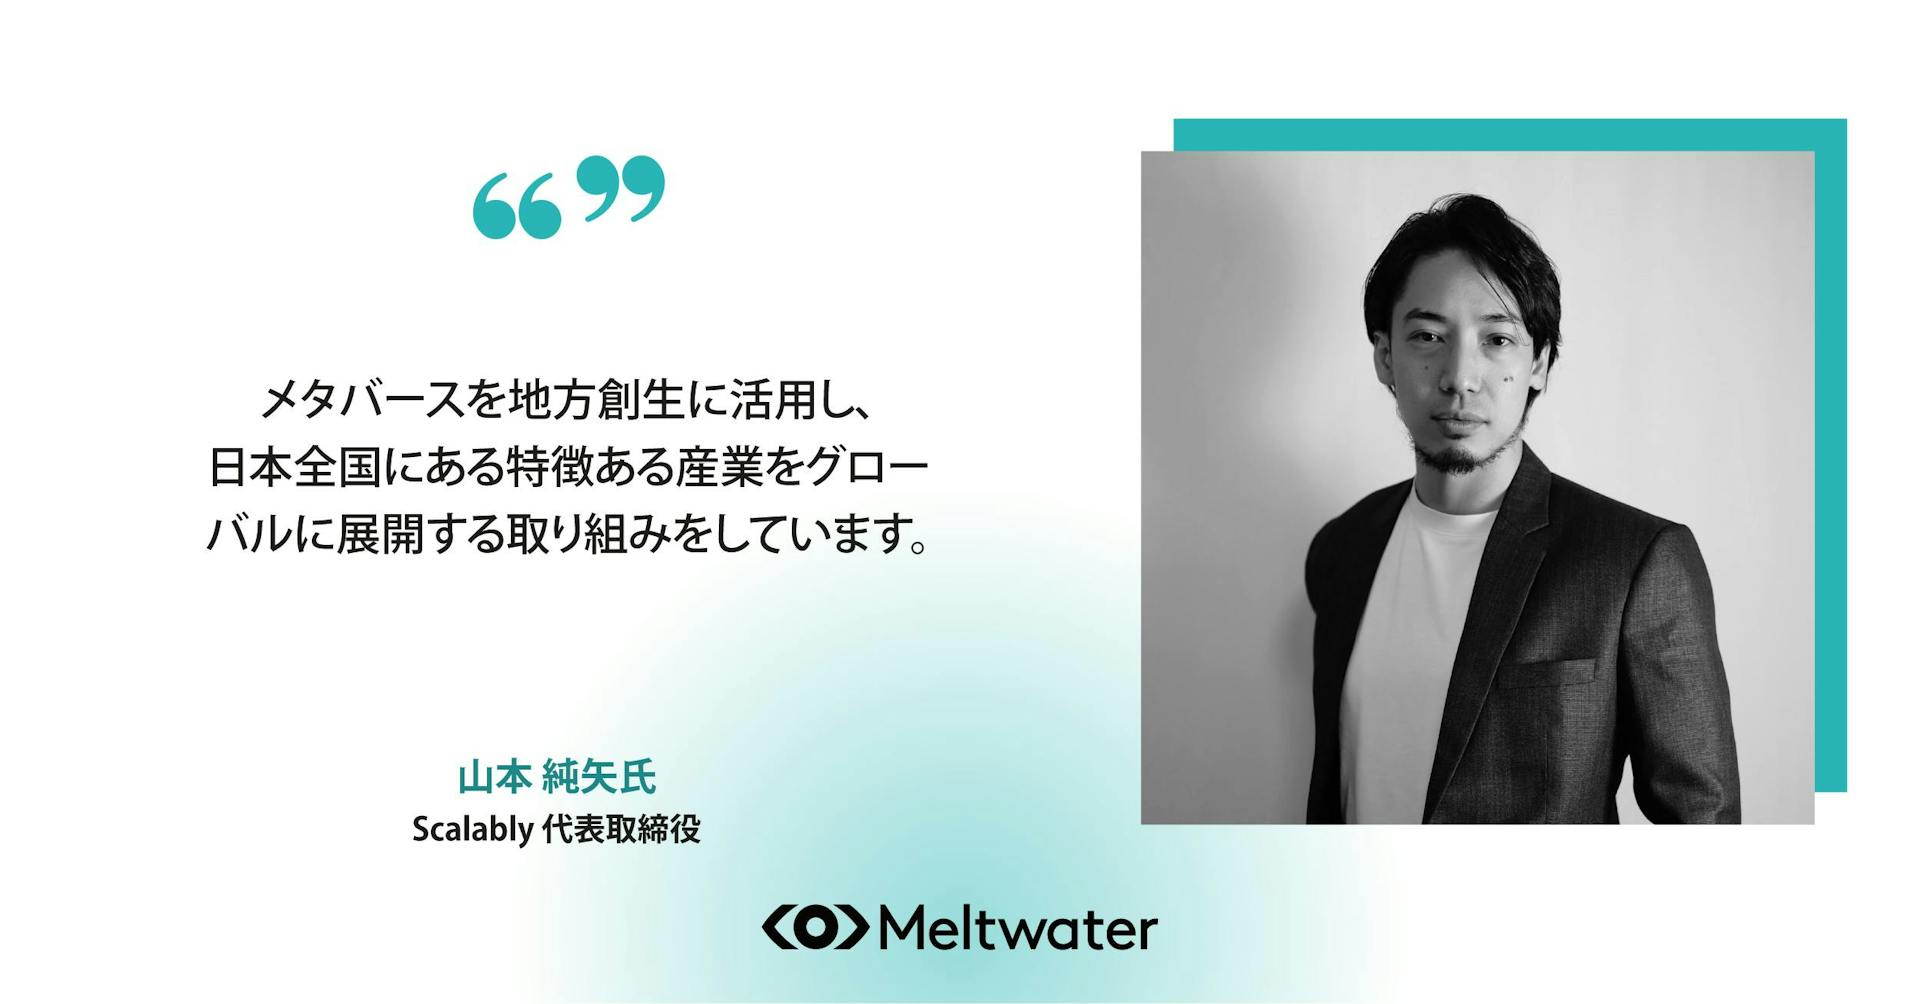 The comment from Junya Yamamoto on the Metaverse.